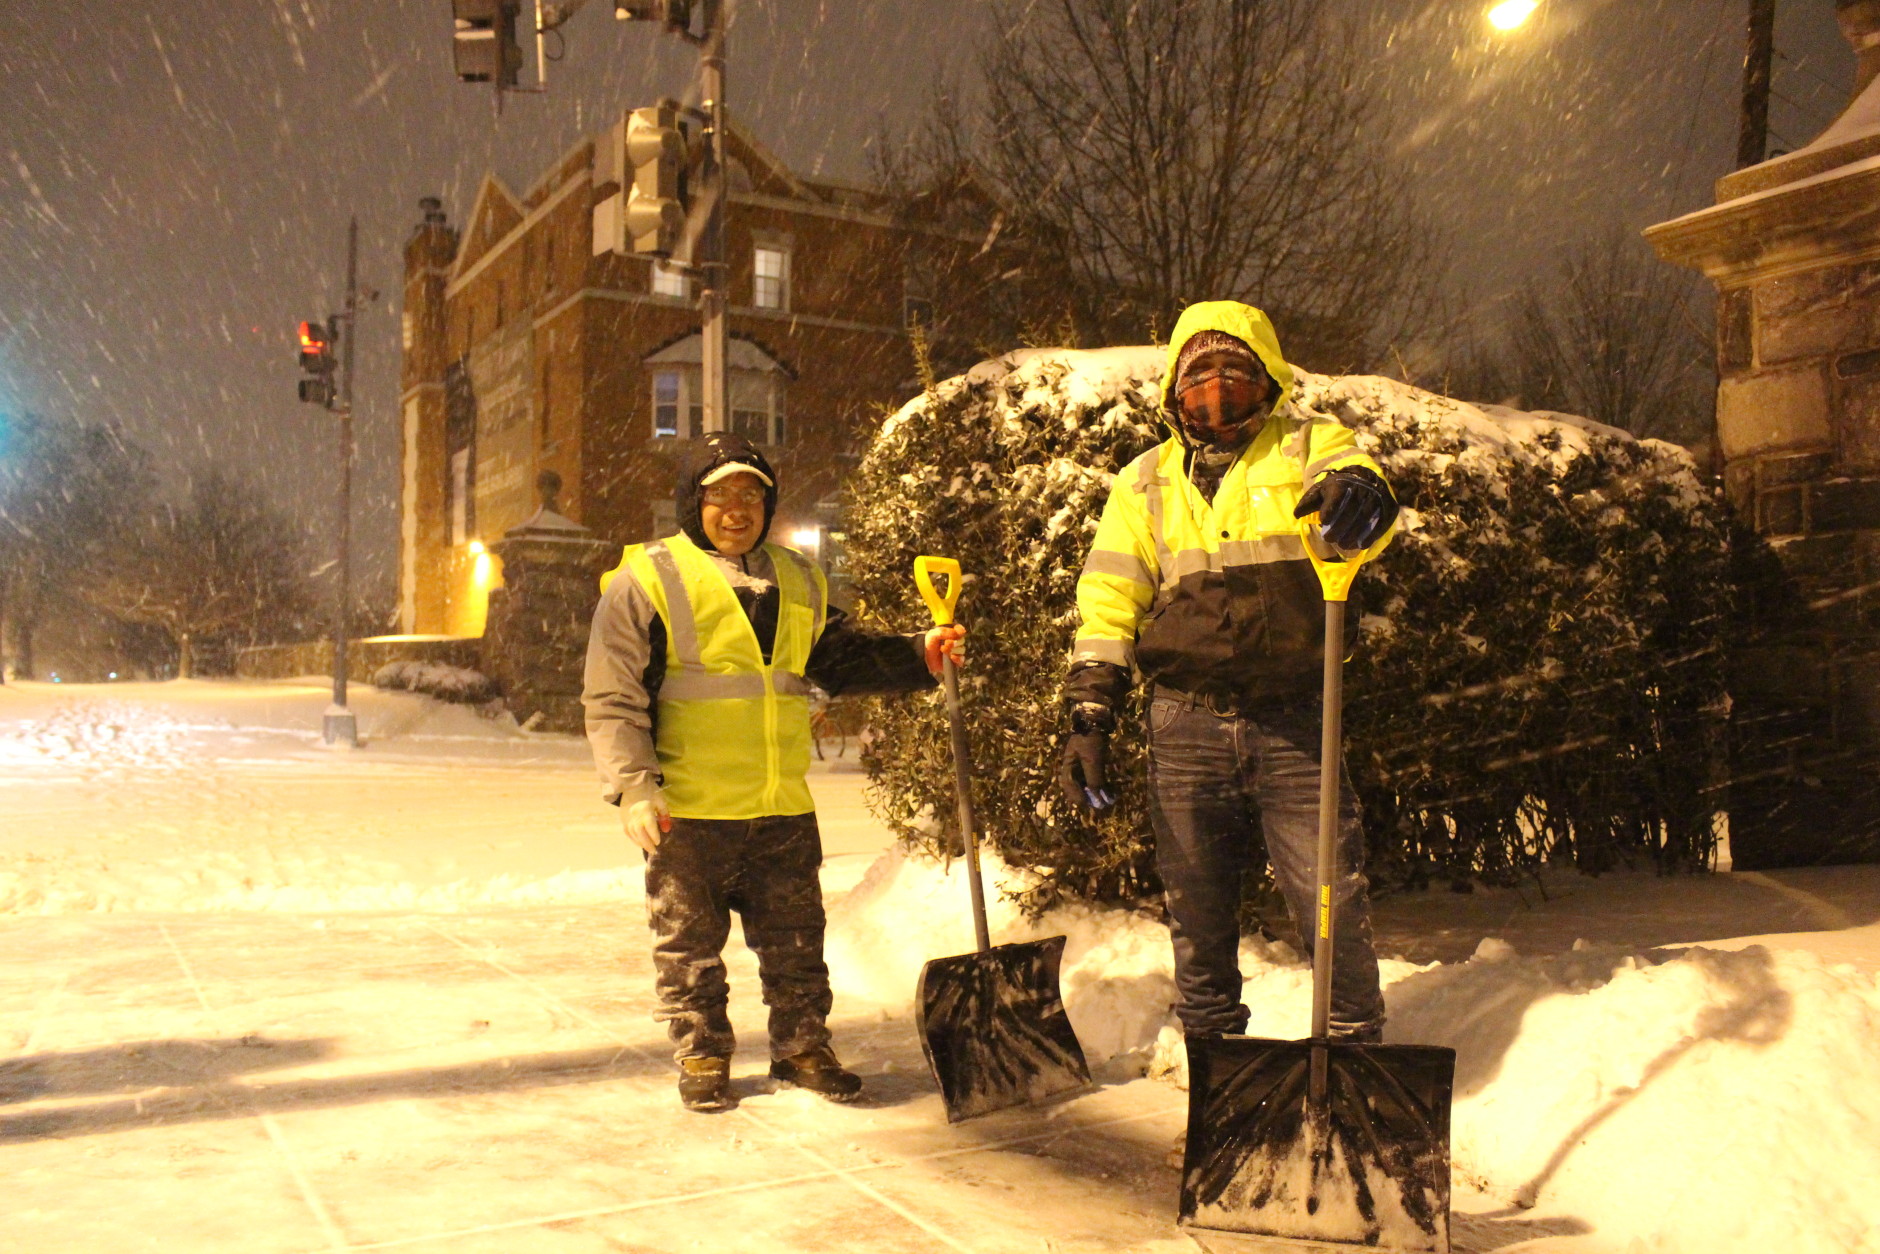 Two snow shovelers took a break while clearing sidewalks on Wisconsin Avenue on Friday night. (WTOP/Dana Gooley)